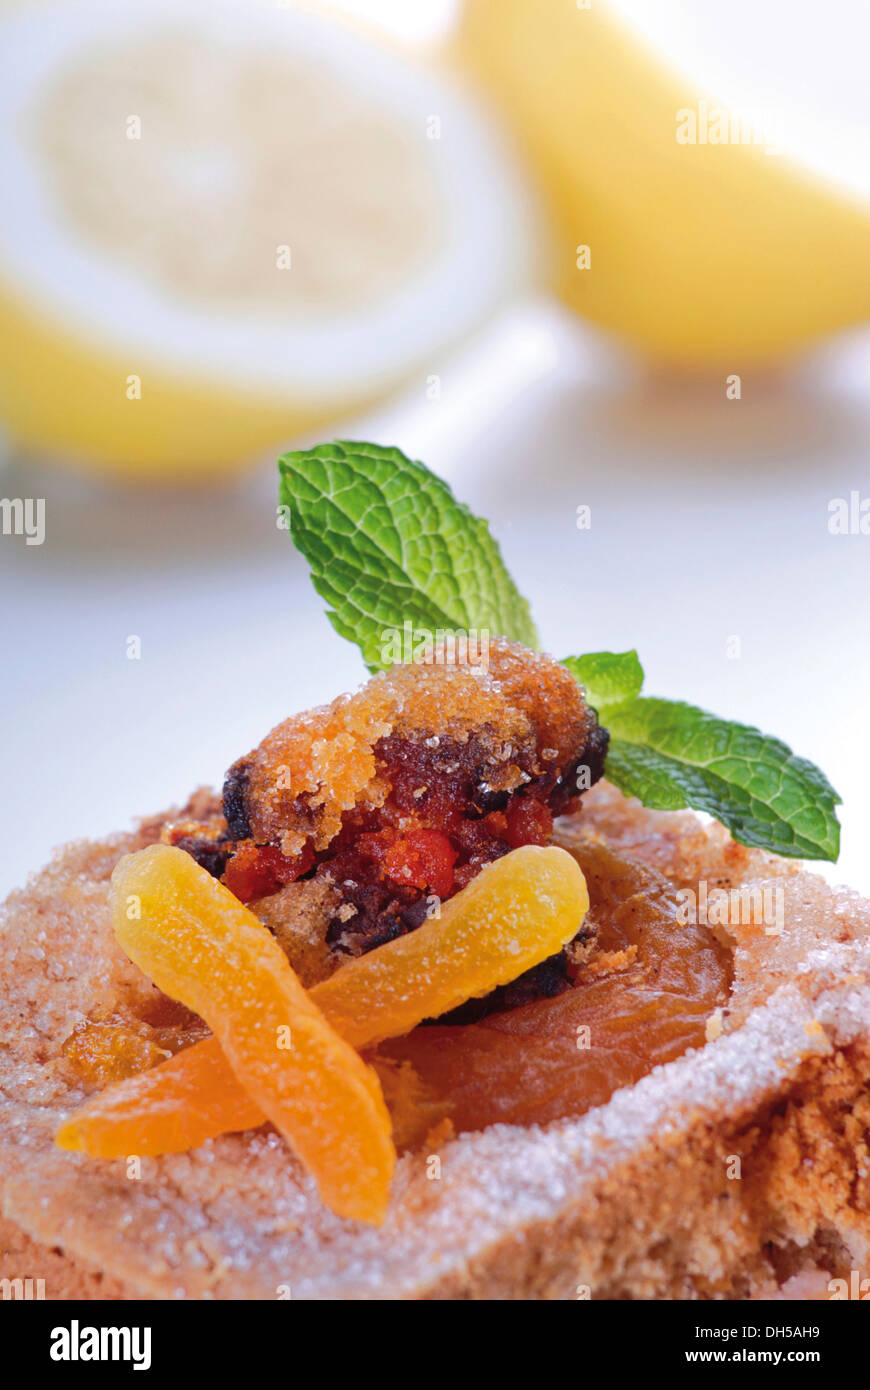 Apricot cake with roasted bacon rind Stock Photo